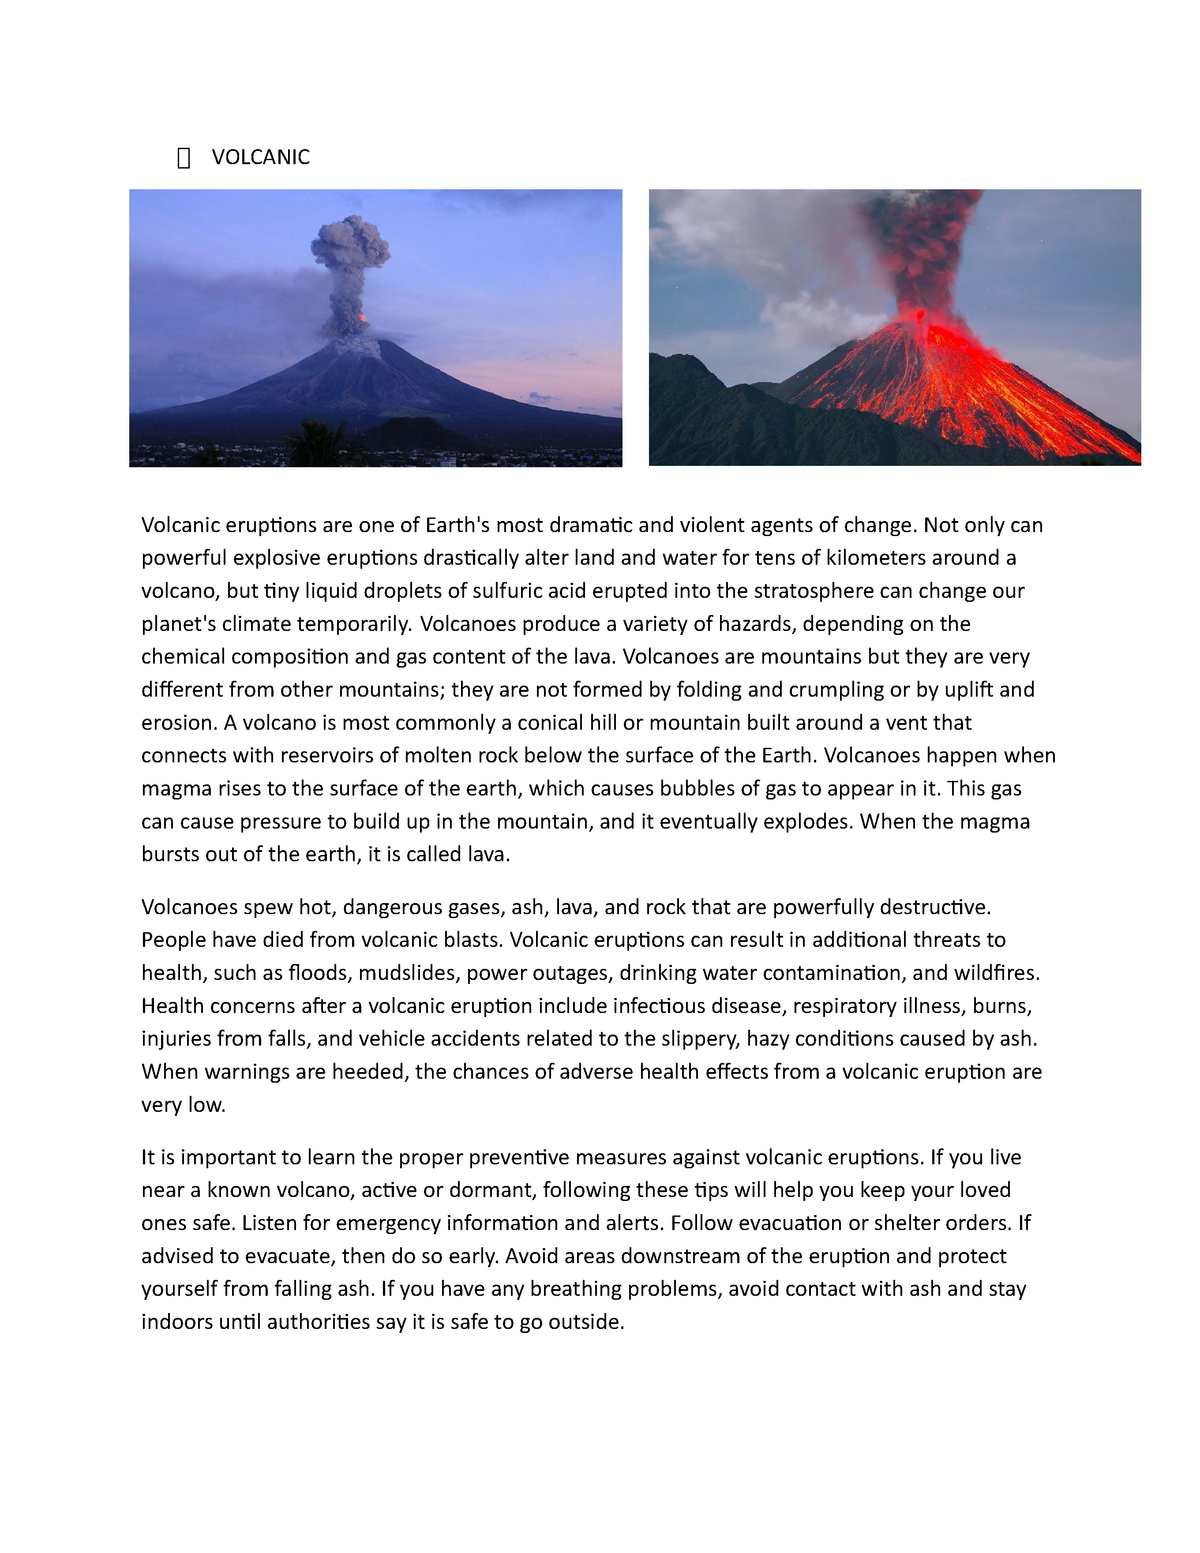 essay about volcanoes and earthquakes